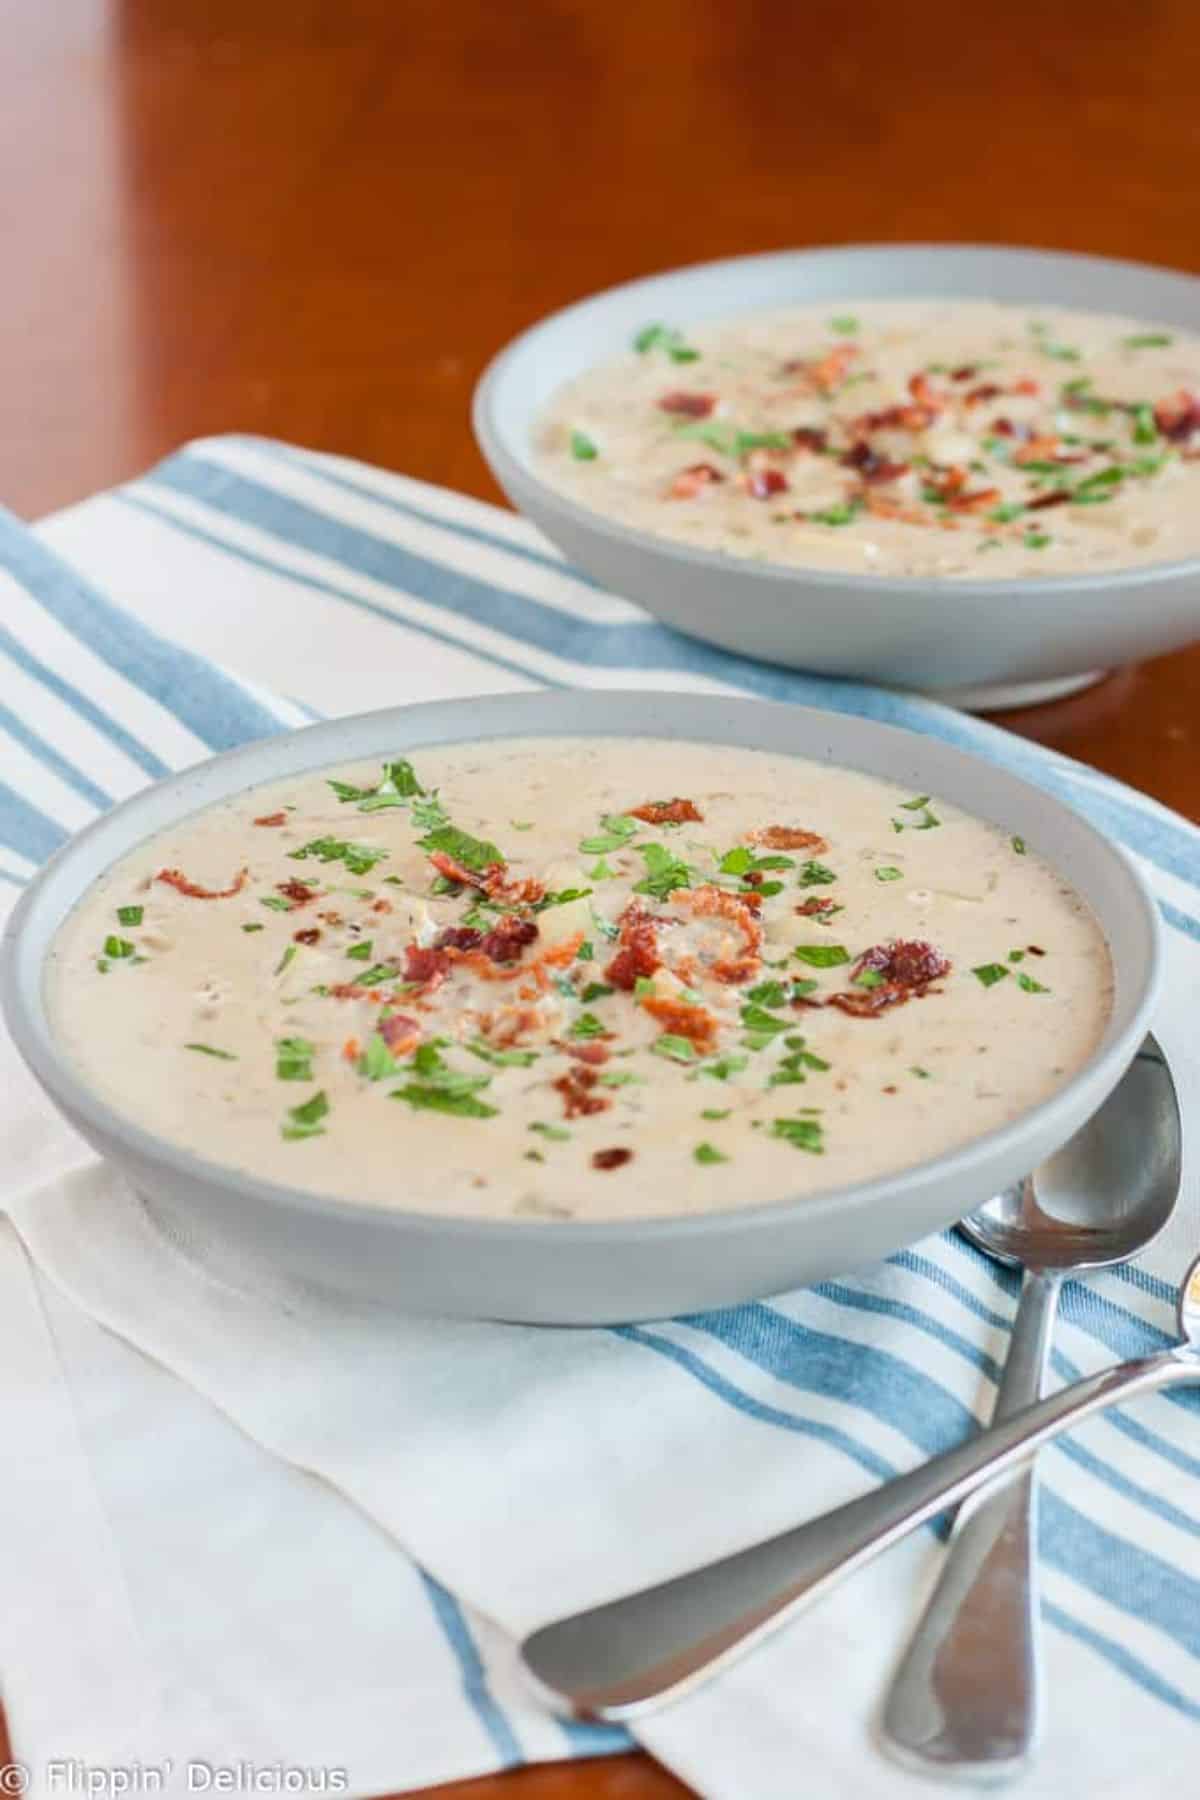 Delicious Gluten-Free Clam Chowder in two gray bowls.